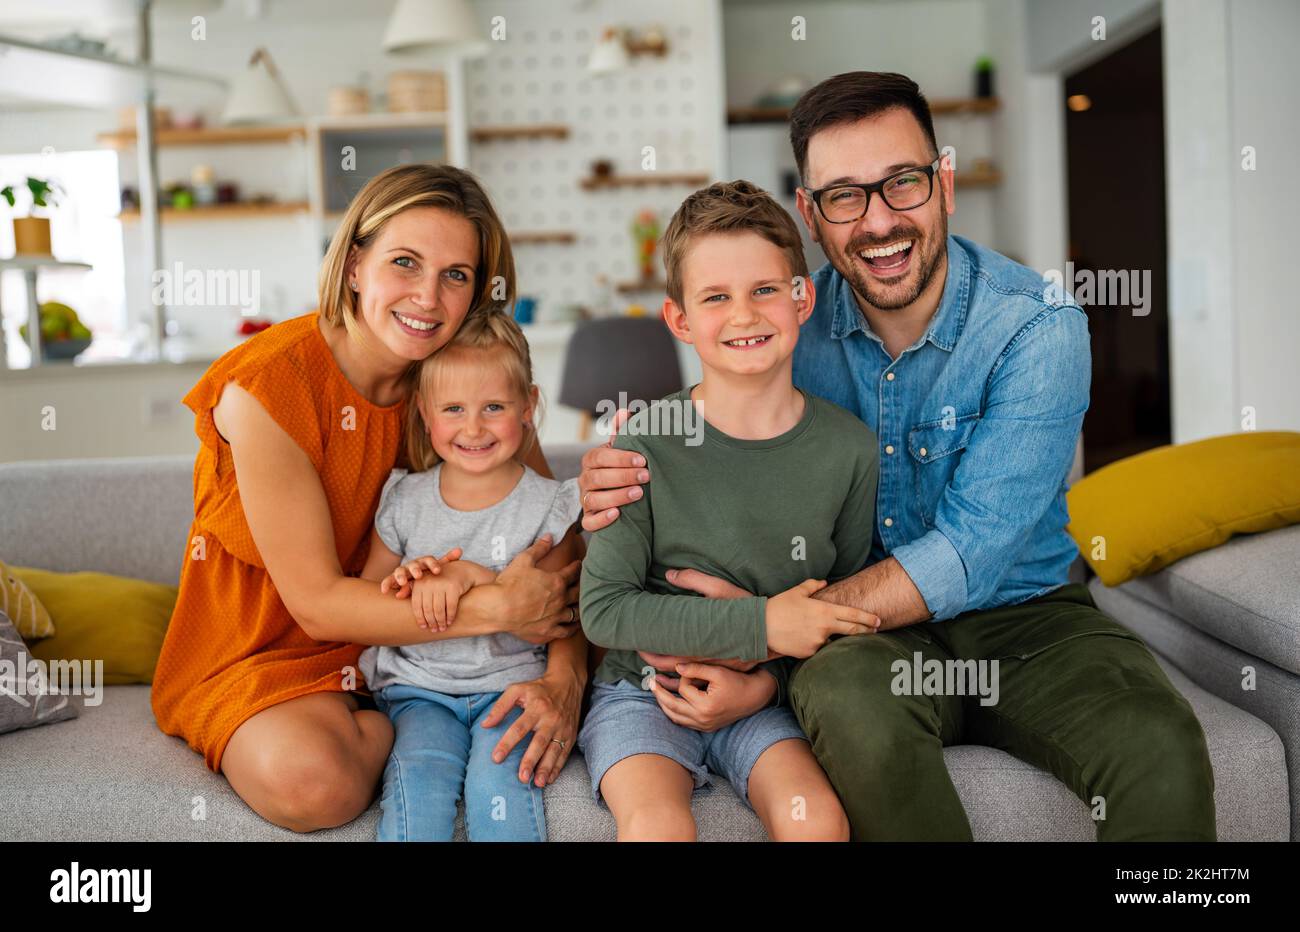 Happy family having fun time at home. Parents playing smiling with childrens together. Stock Photo